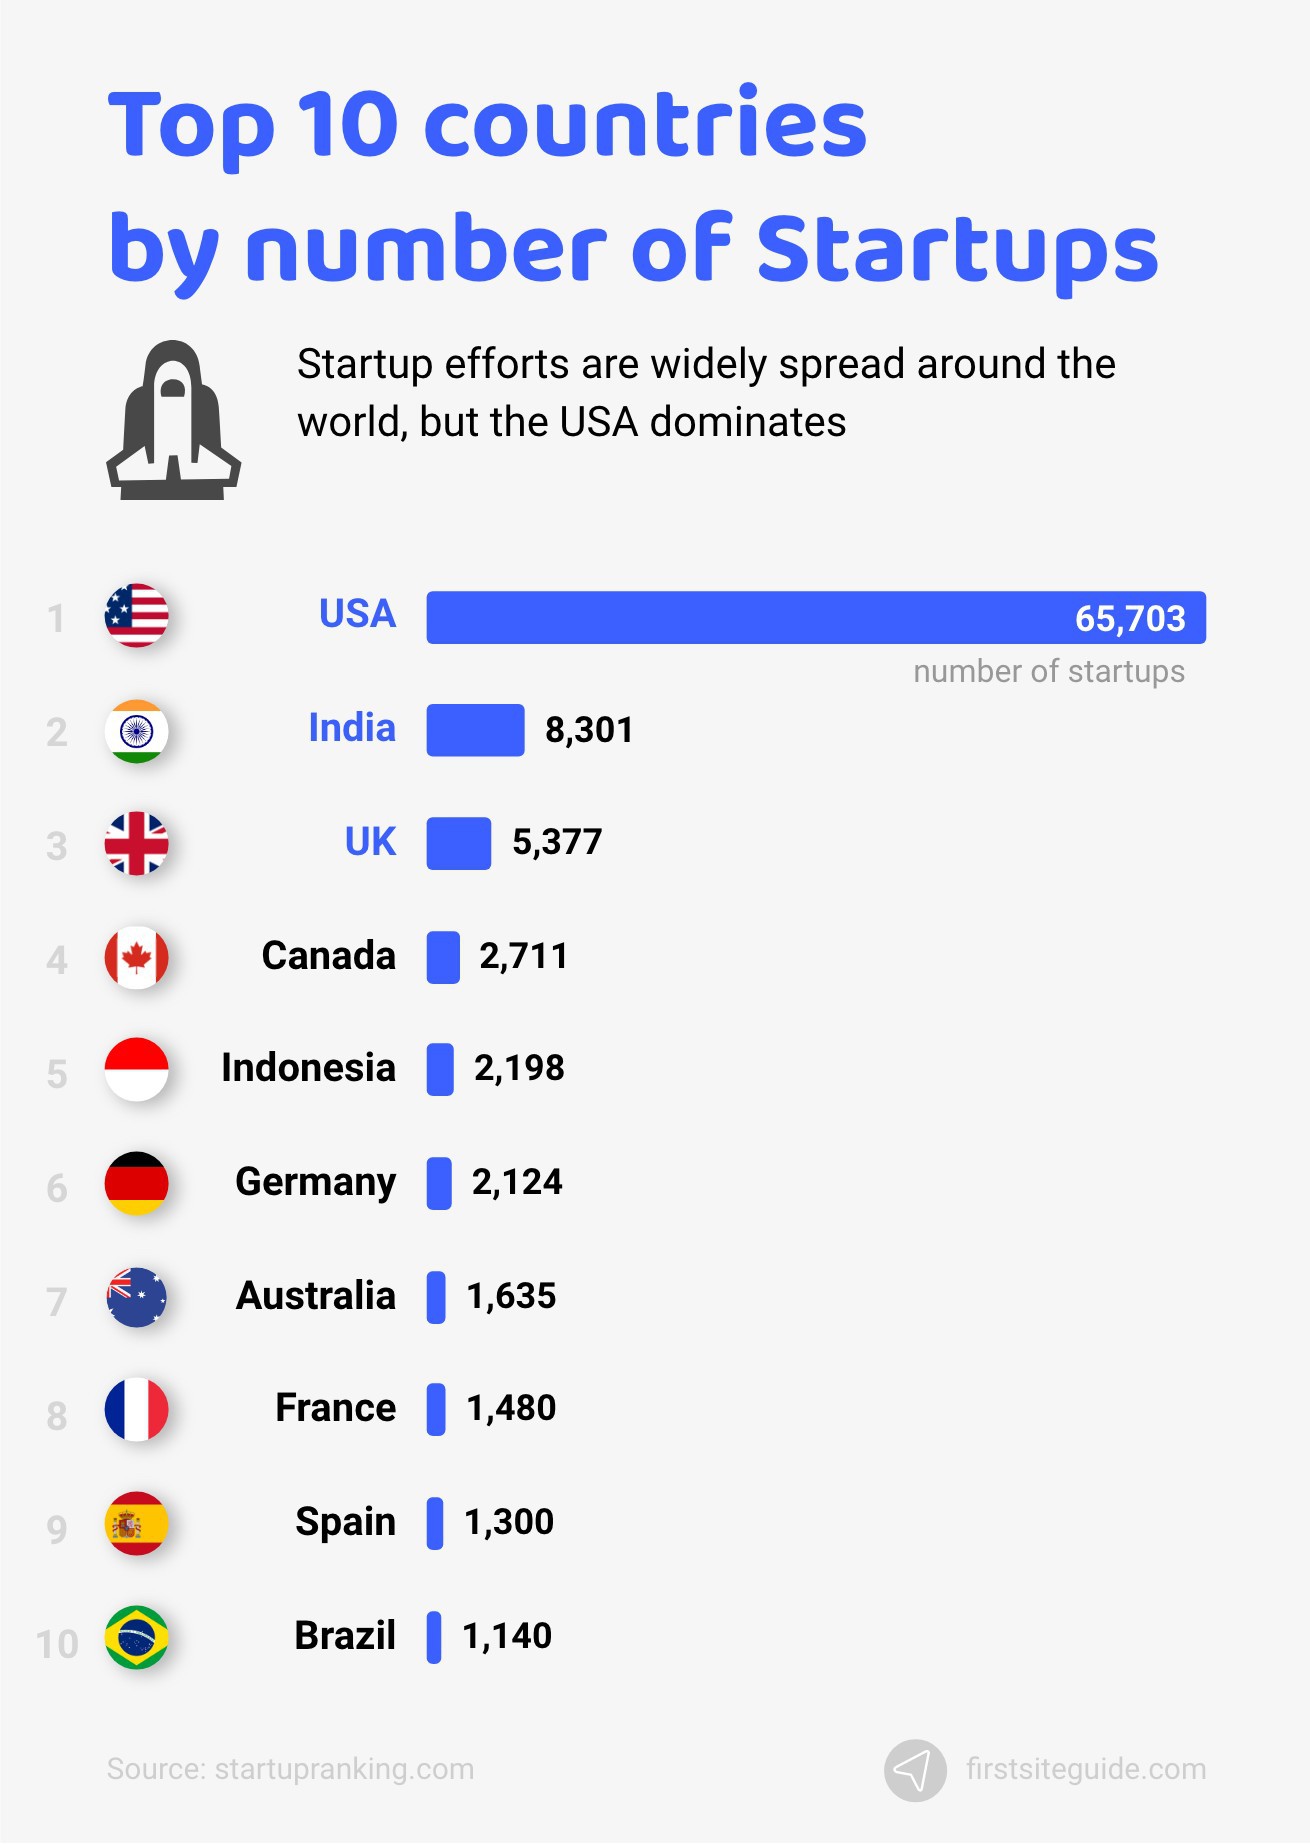 Top 10 countries by number of startups